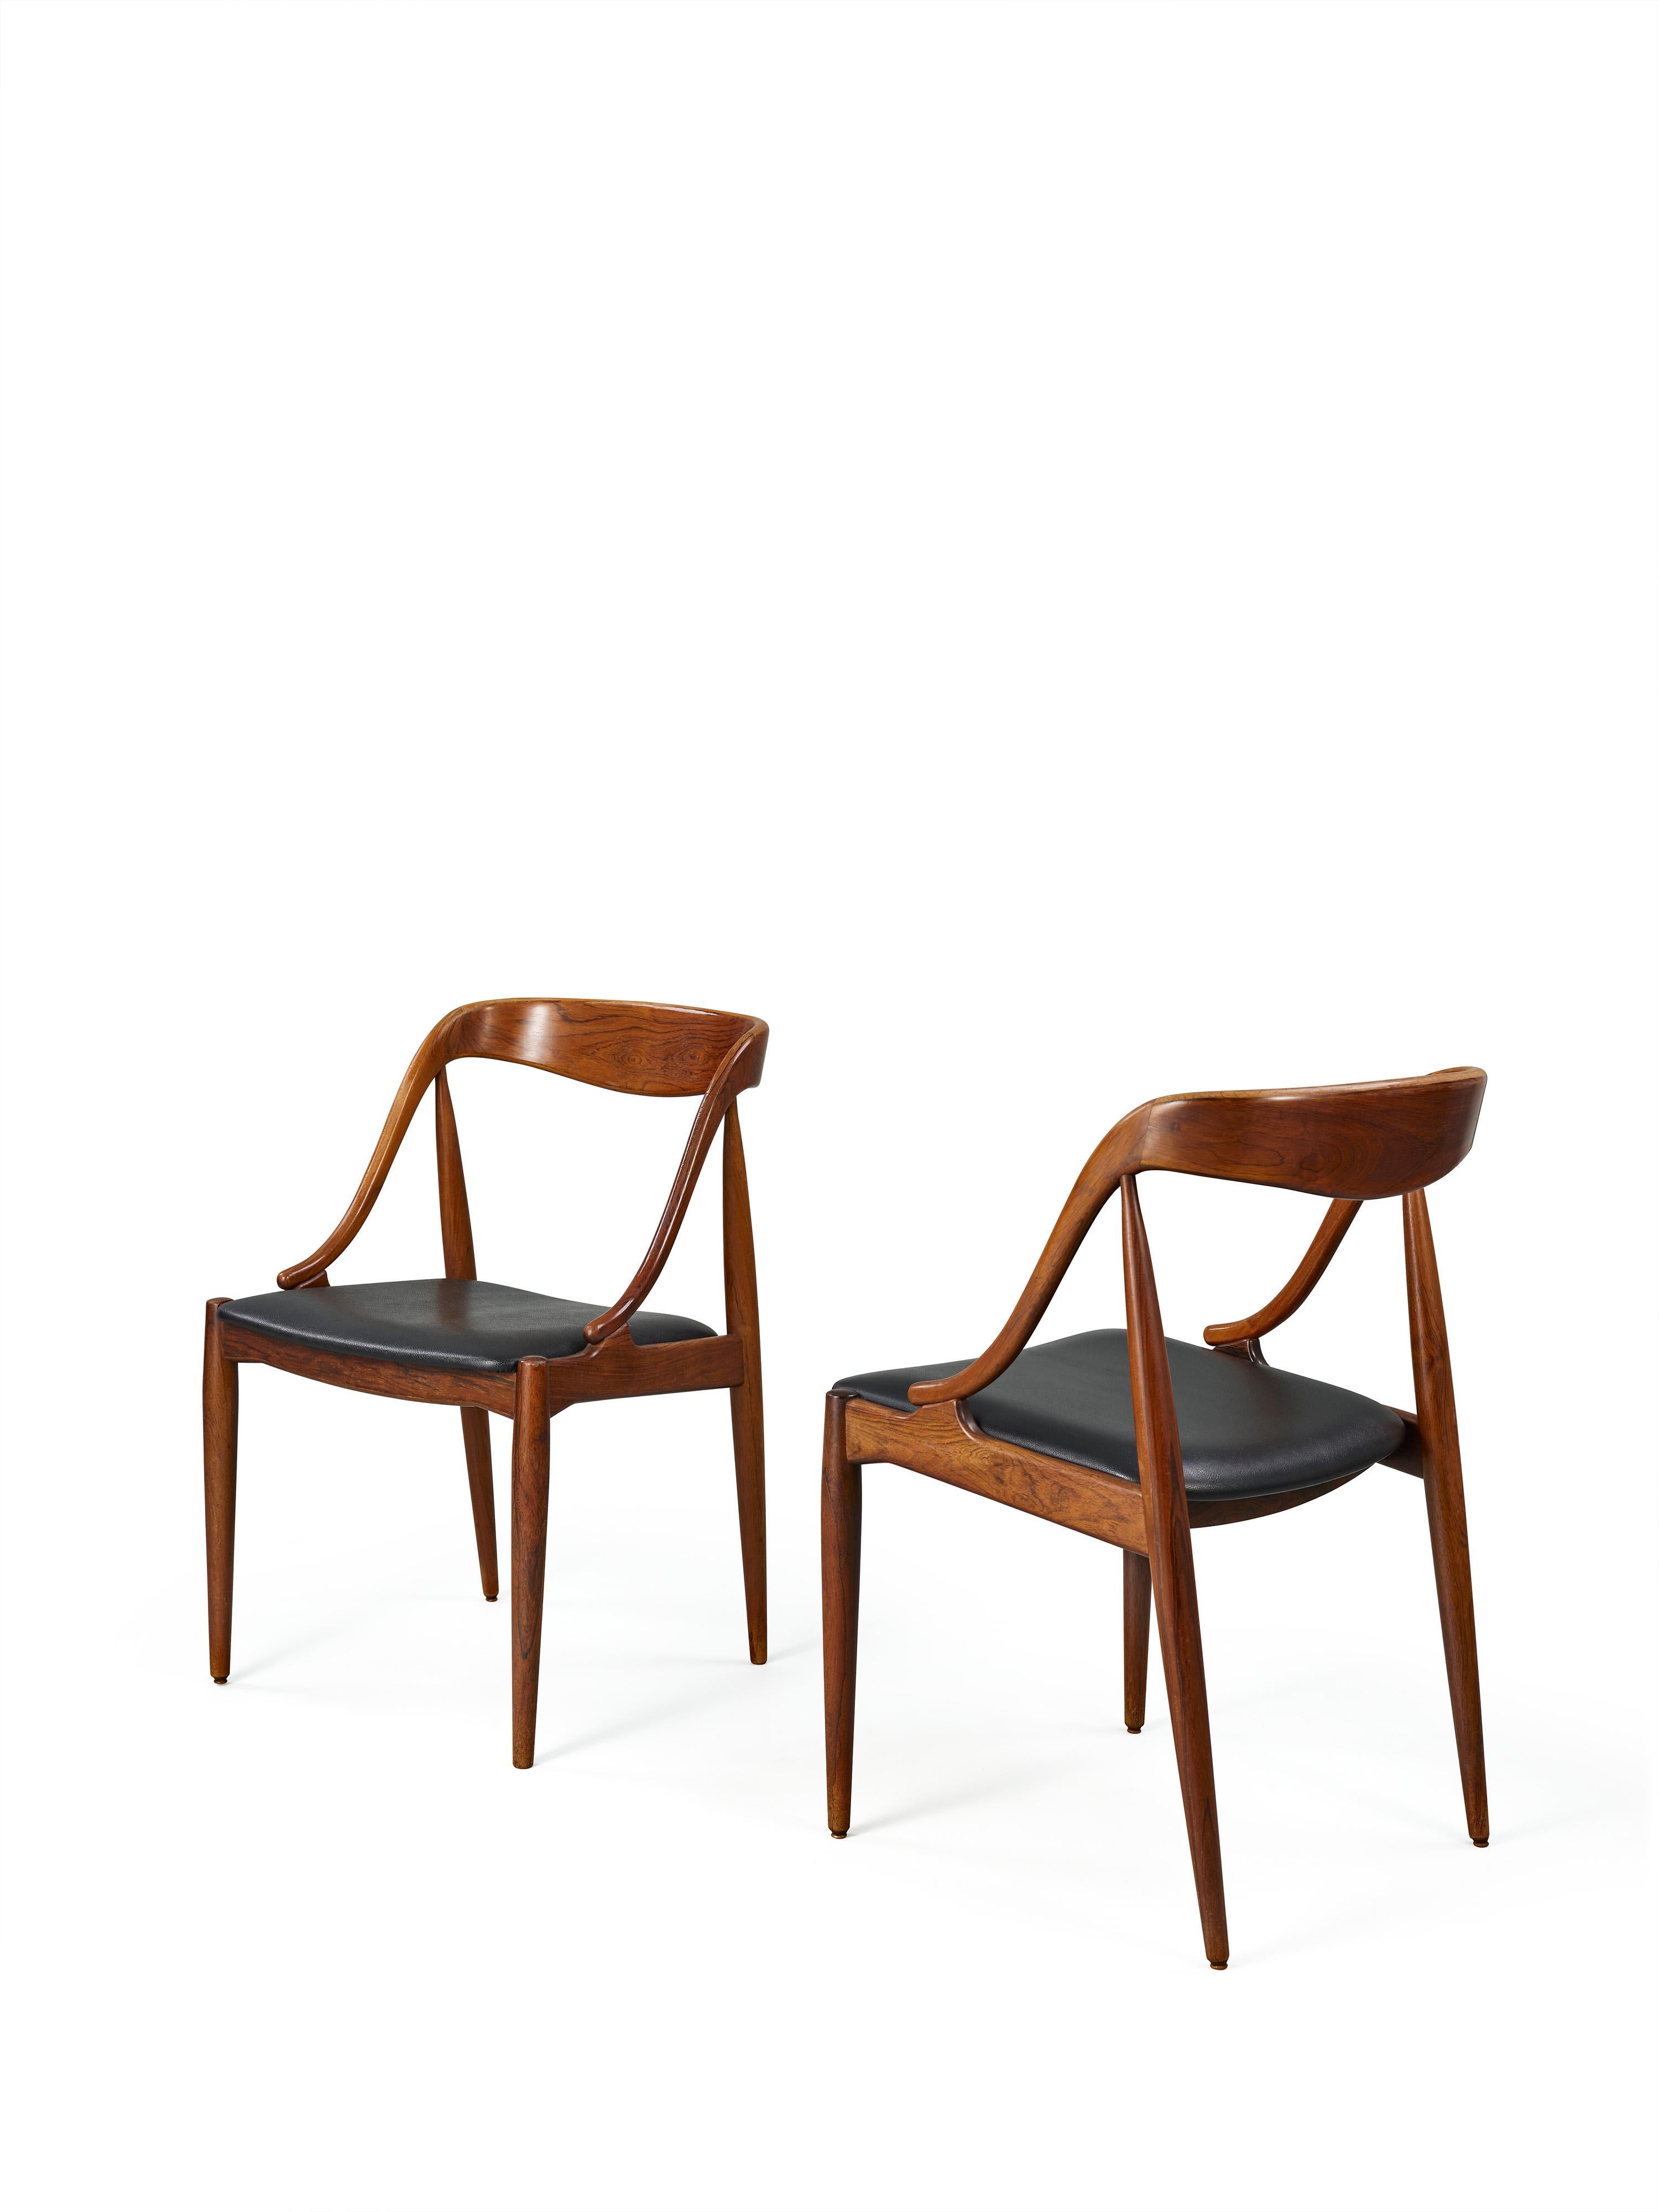 Woodwork A pair of 1960s Teak Johannes Andersen Dining Chairs for Uldum Denmark For Sale